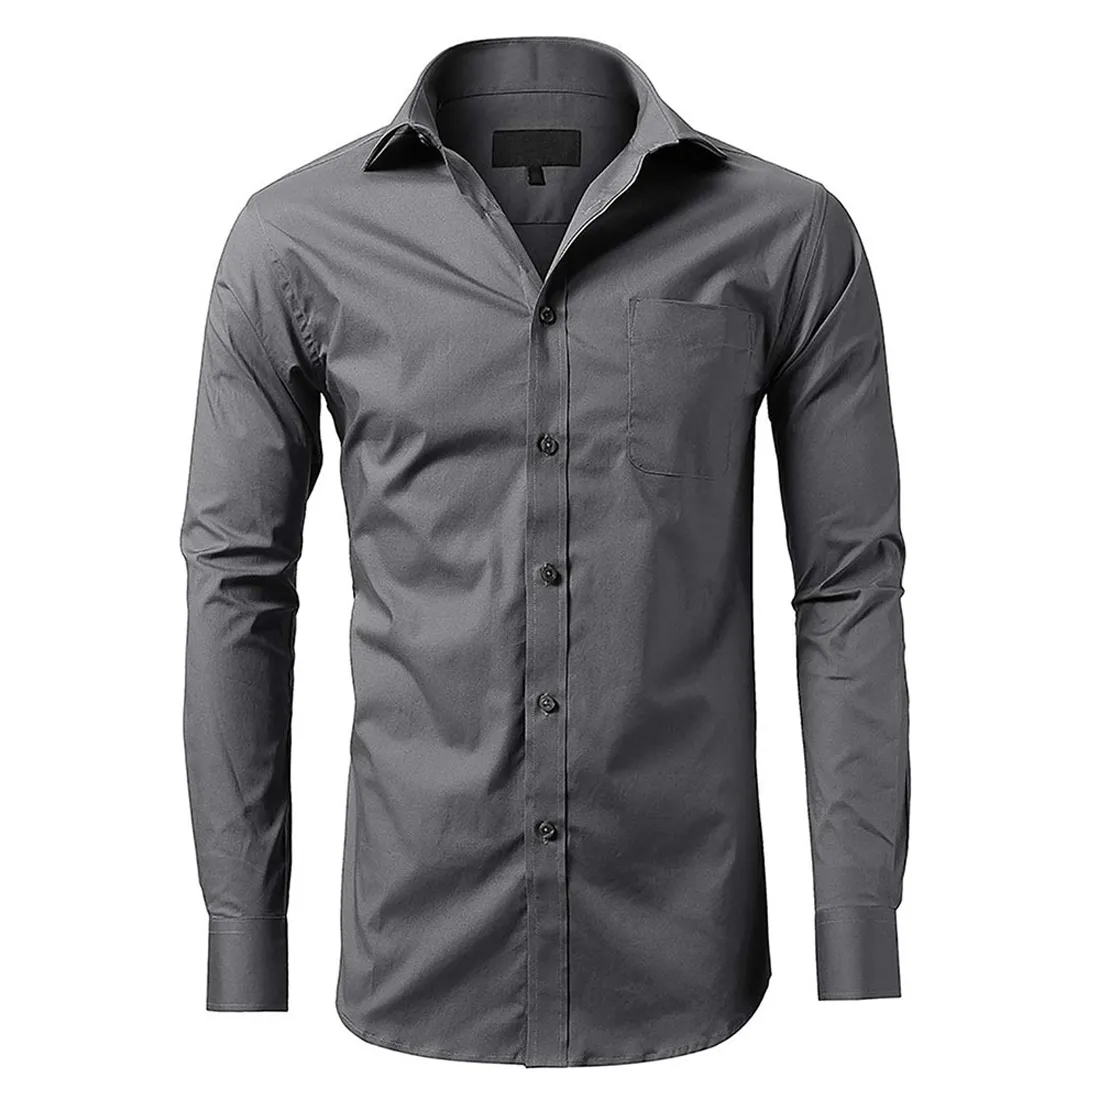 Solid Color High Quality Cheap Price Best Design Professional Cotton Material Men New Design Dress Shirt